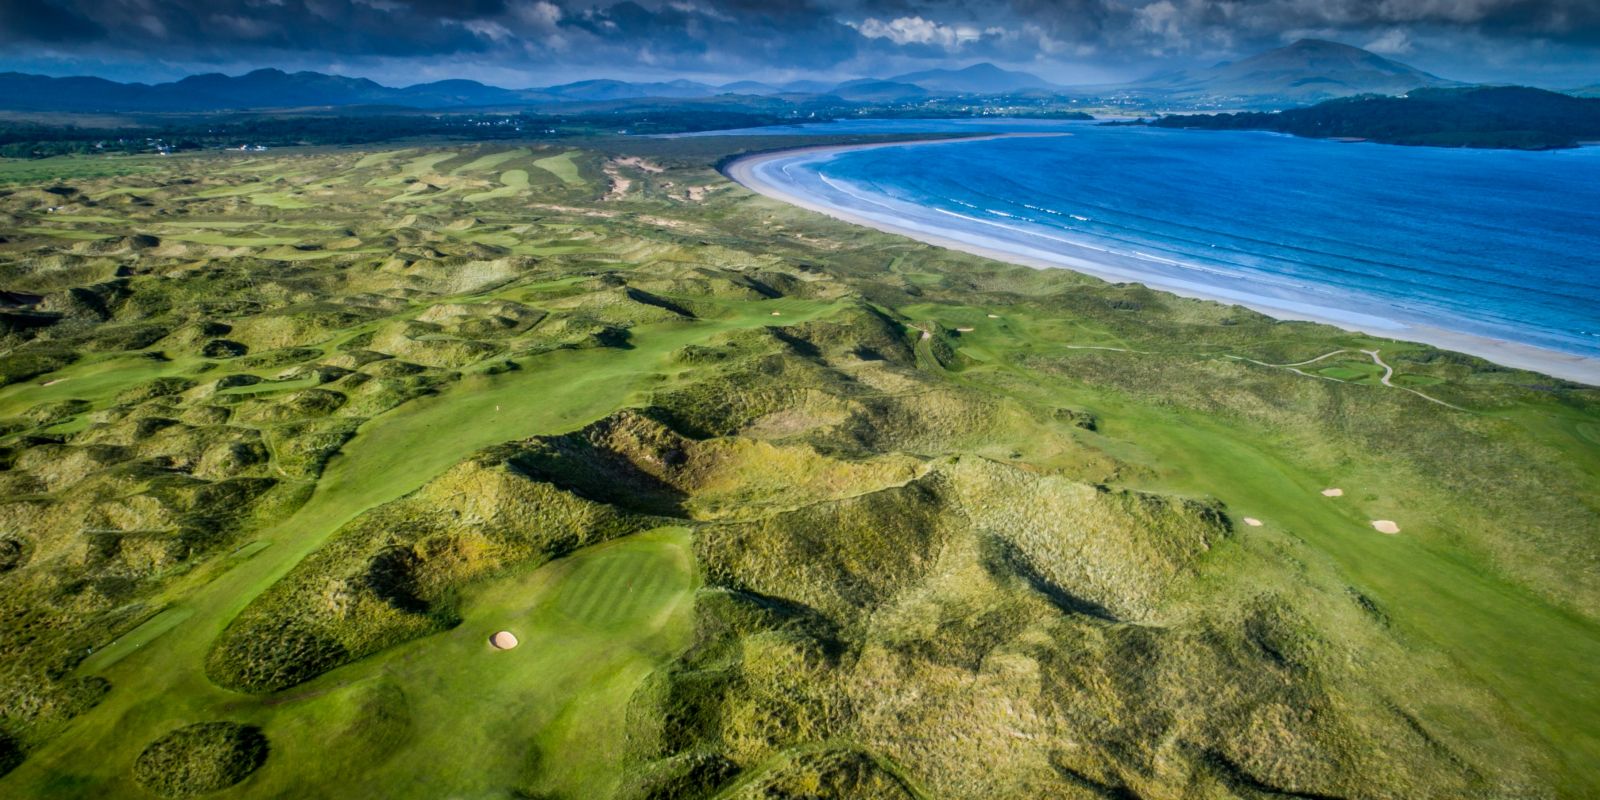 Aerial view of the Sandy Hills Links and Old Tom Morris golf courses at Rosapenna Golf Resort, Ireland